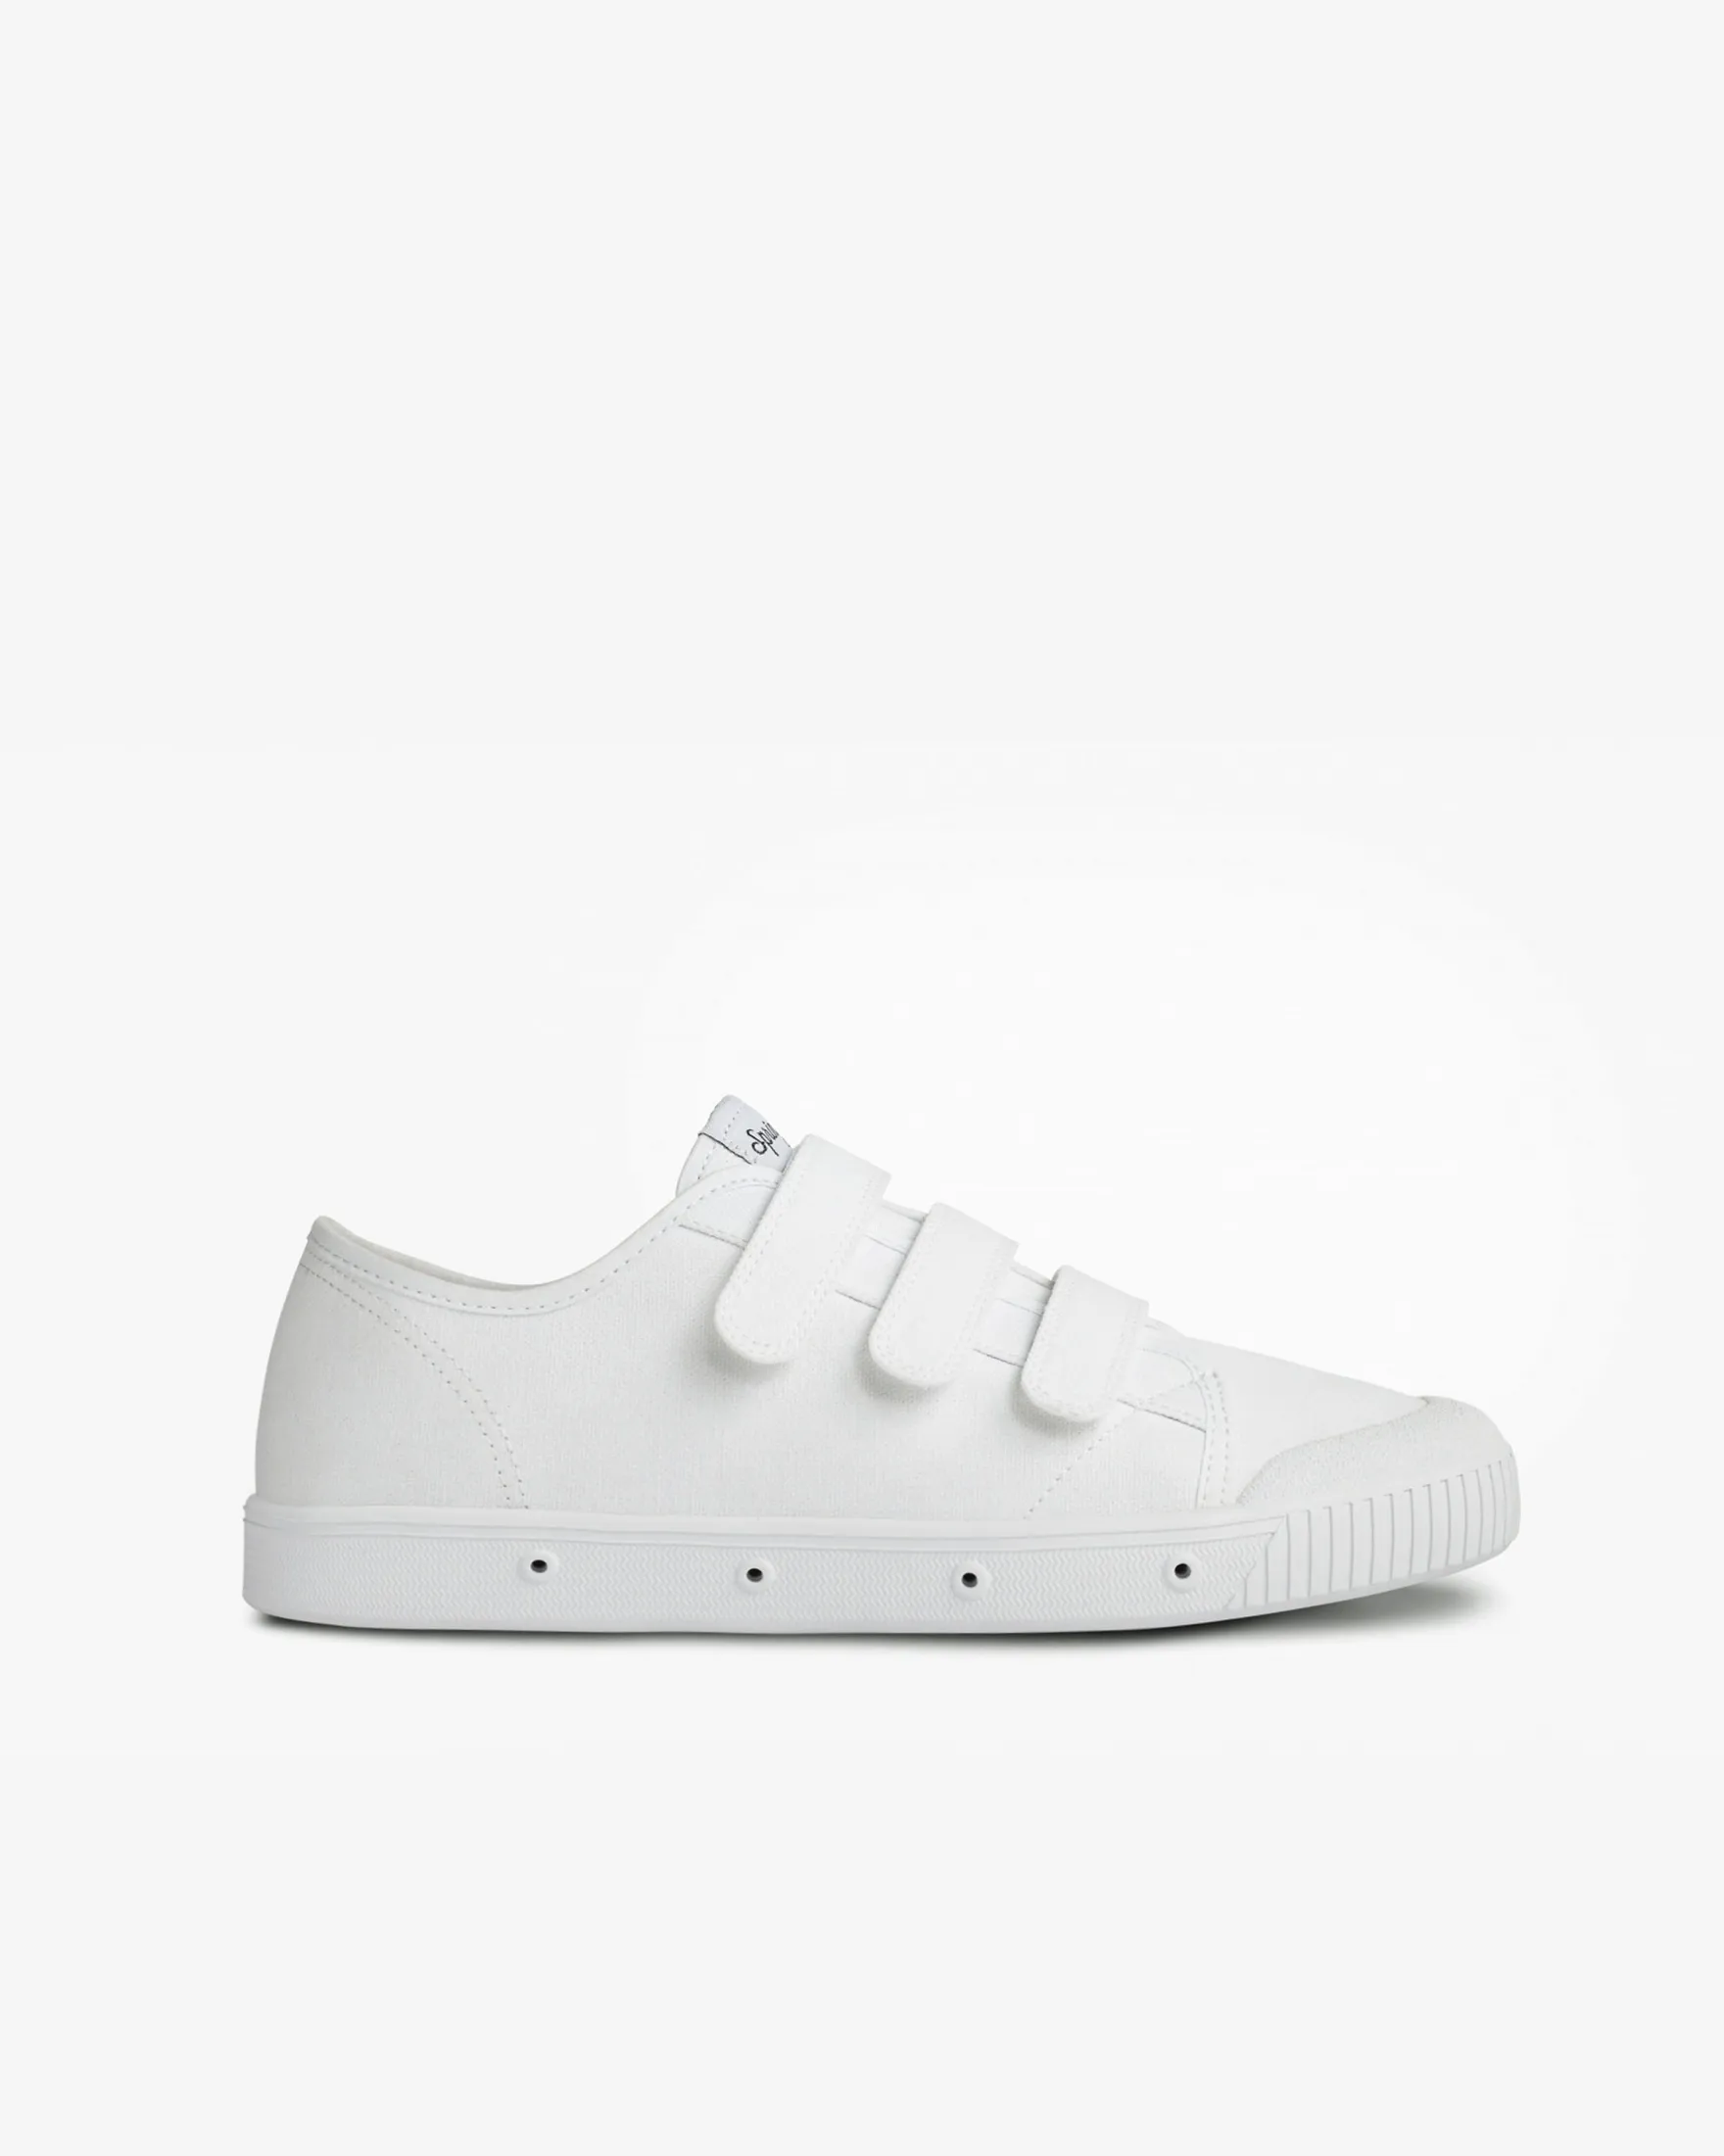 White canvas low top scratch